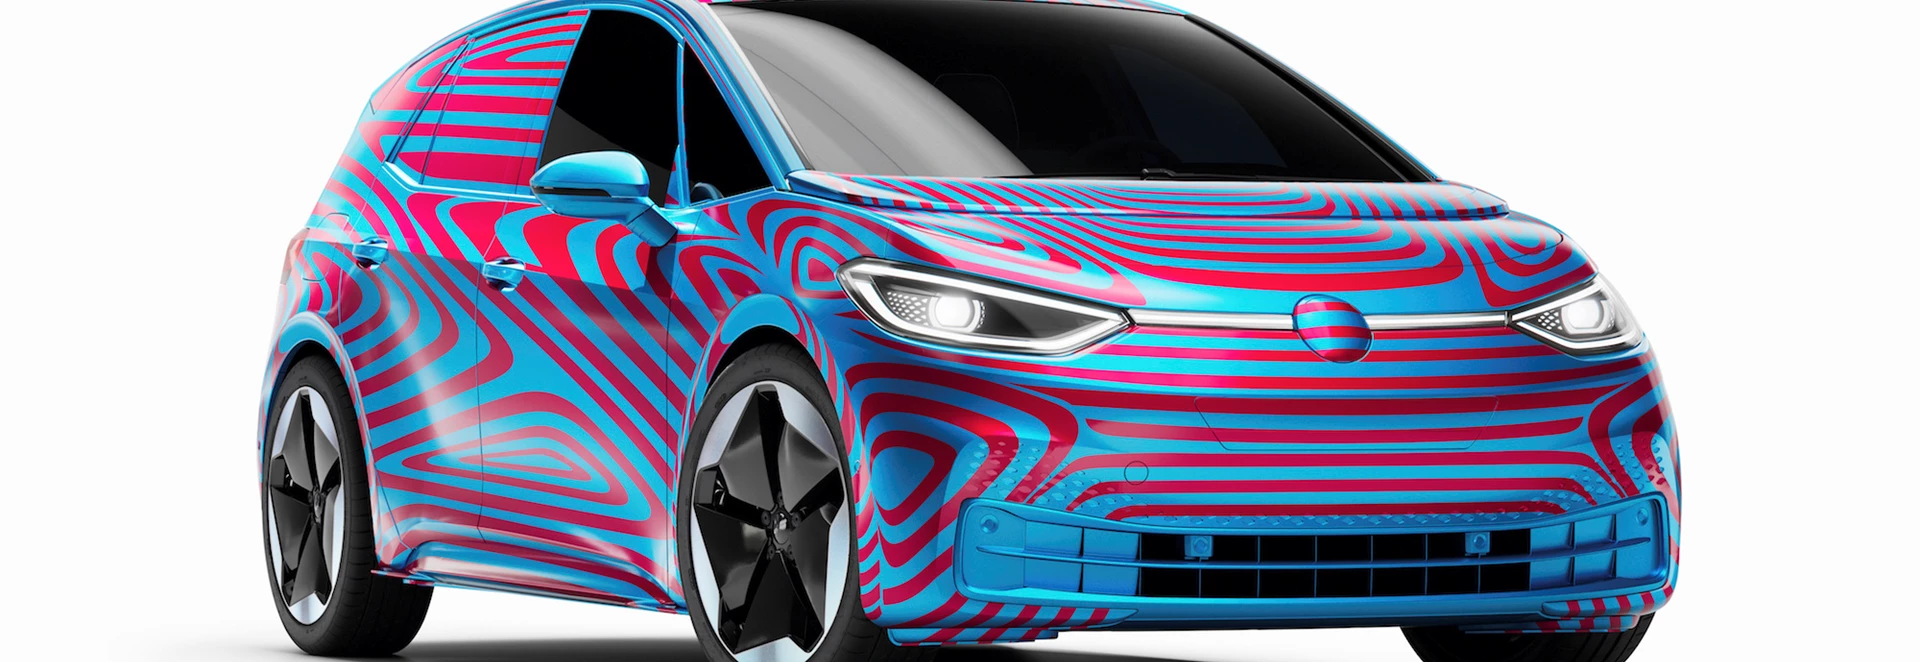 Volkswagen ID.3 name confirmed for upcoming EV